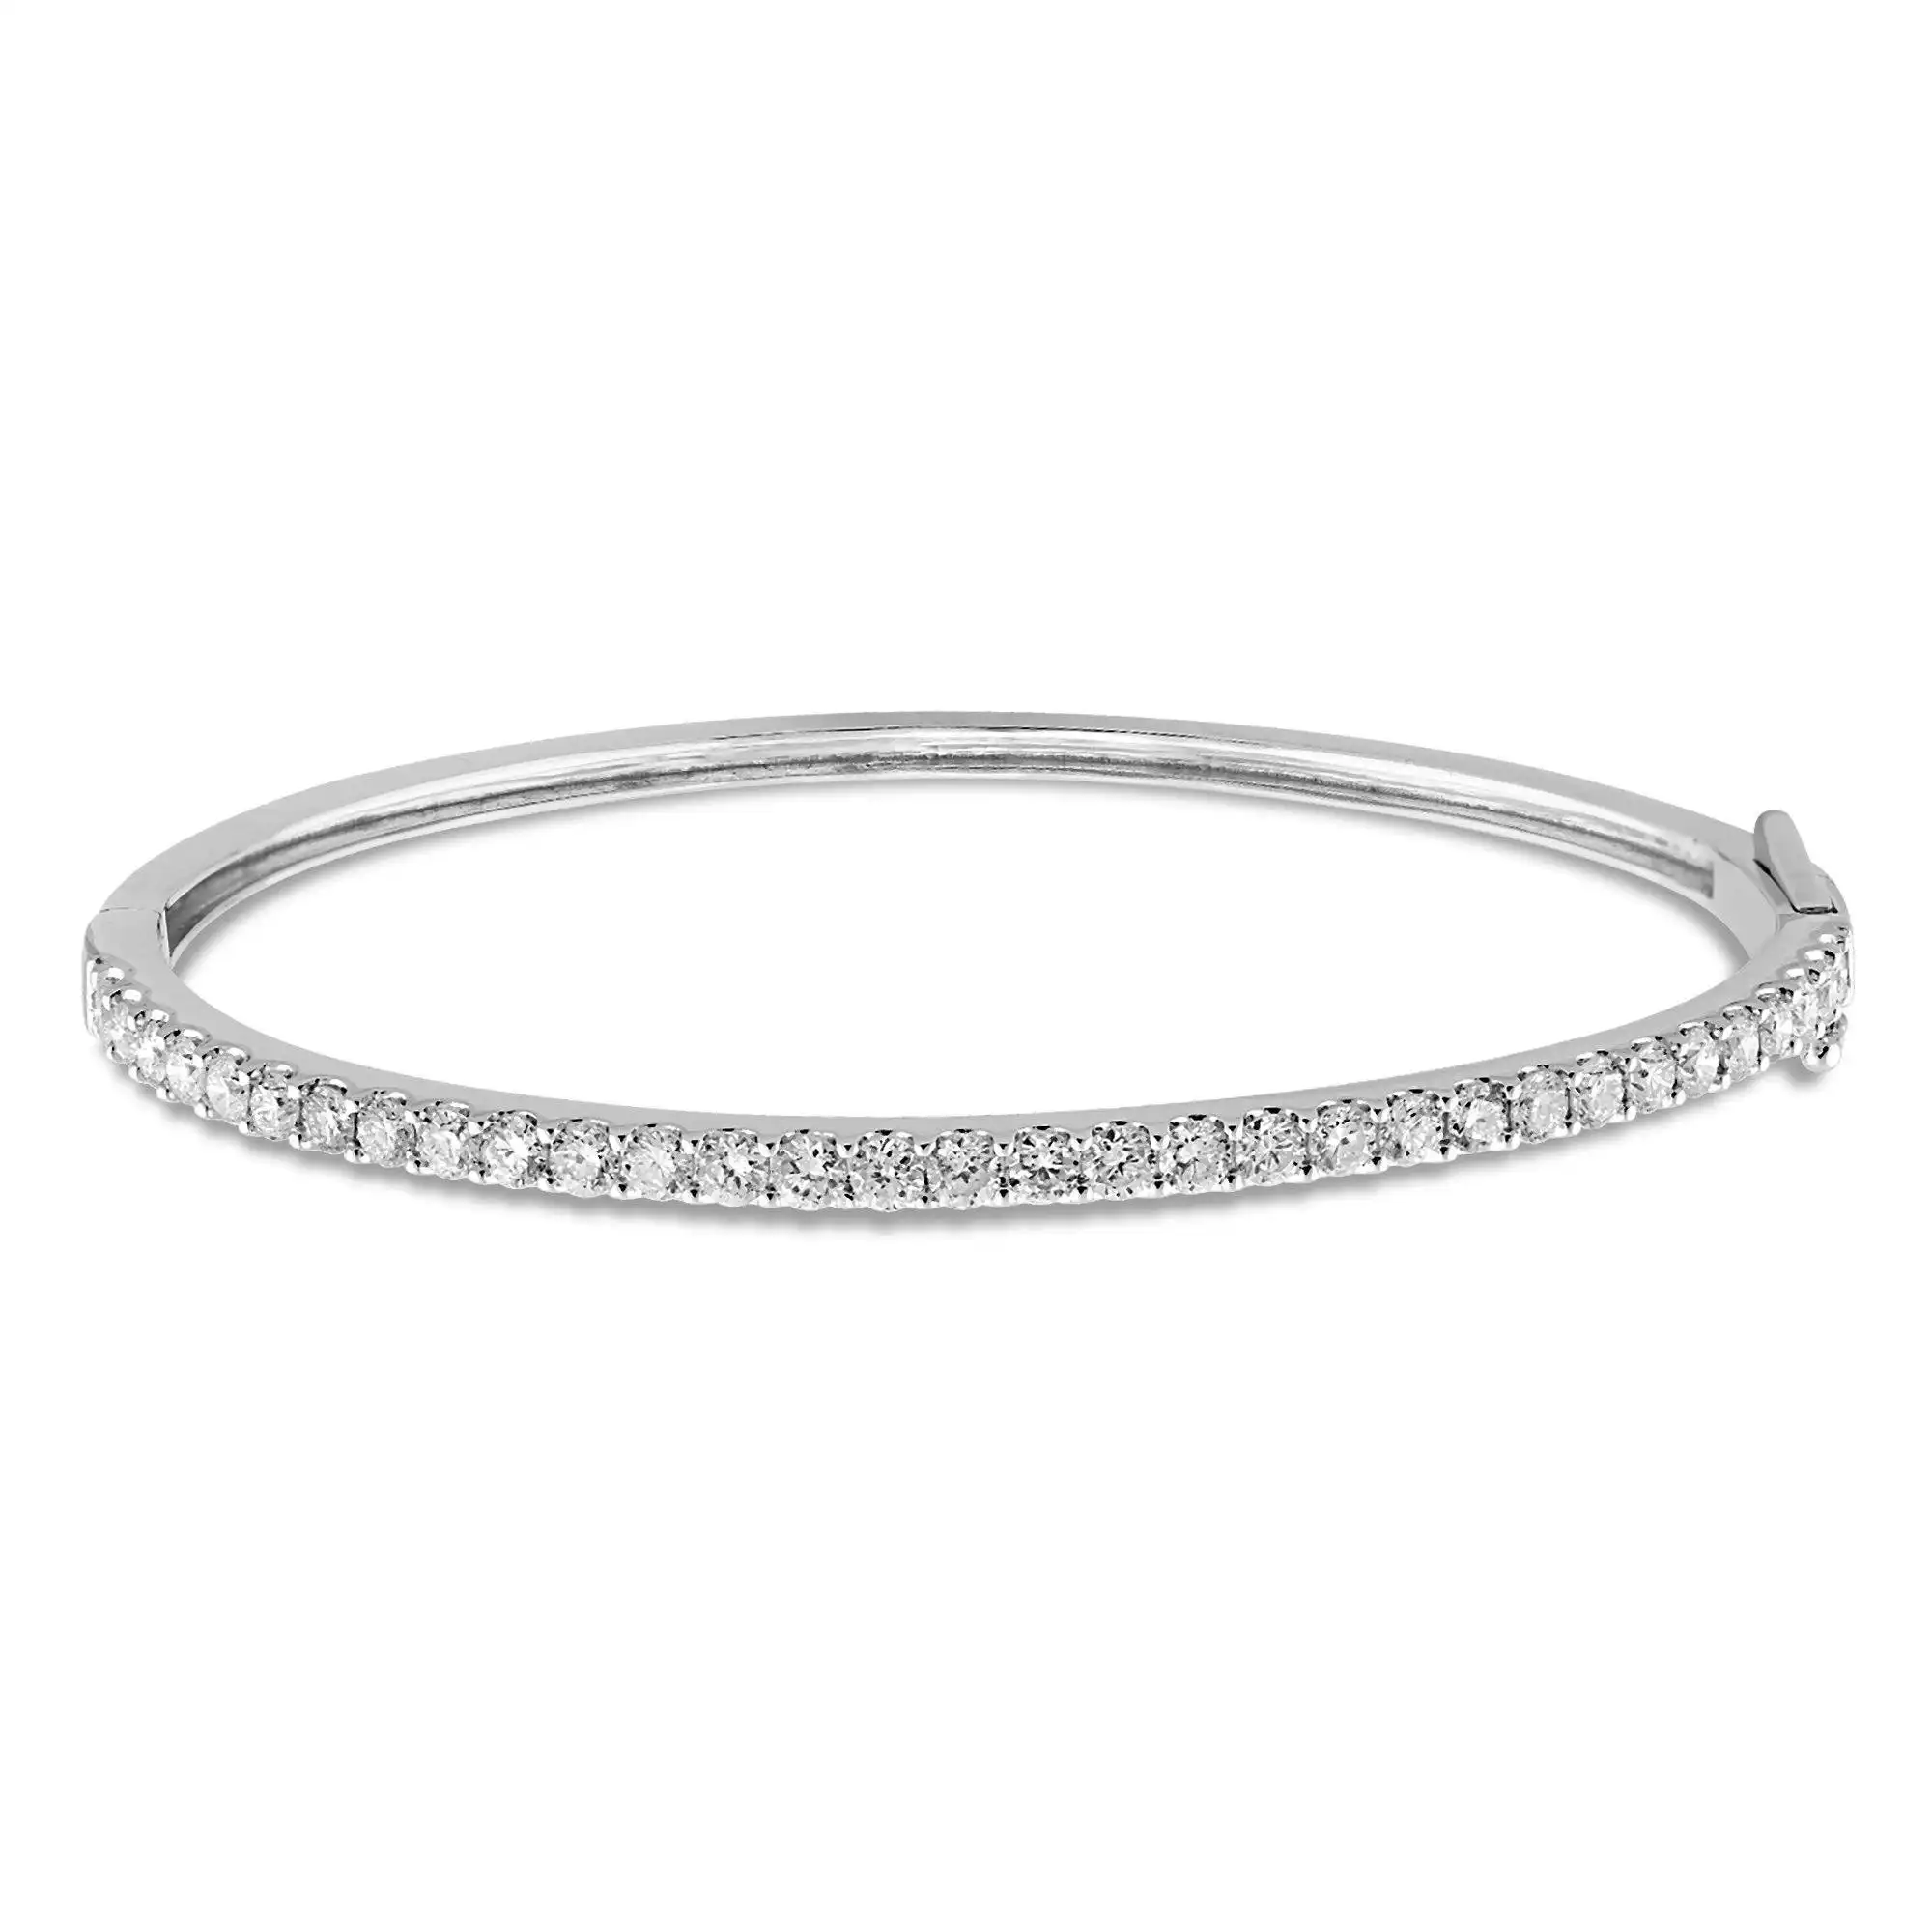 Meera Bangle with 2.00ct of Laboratory Grown Diamonds in 9ct White Gold